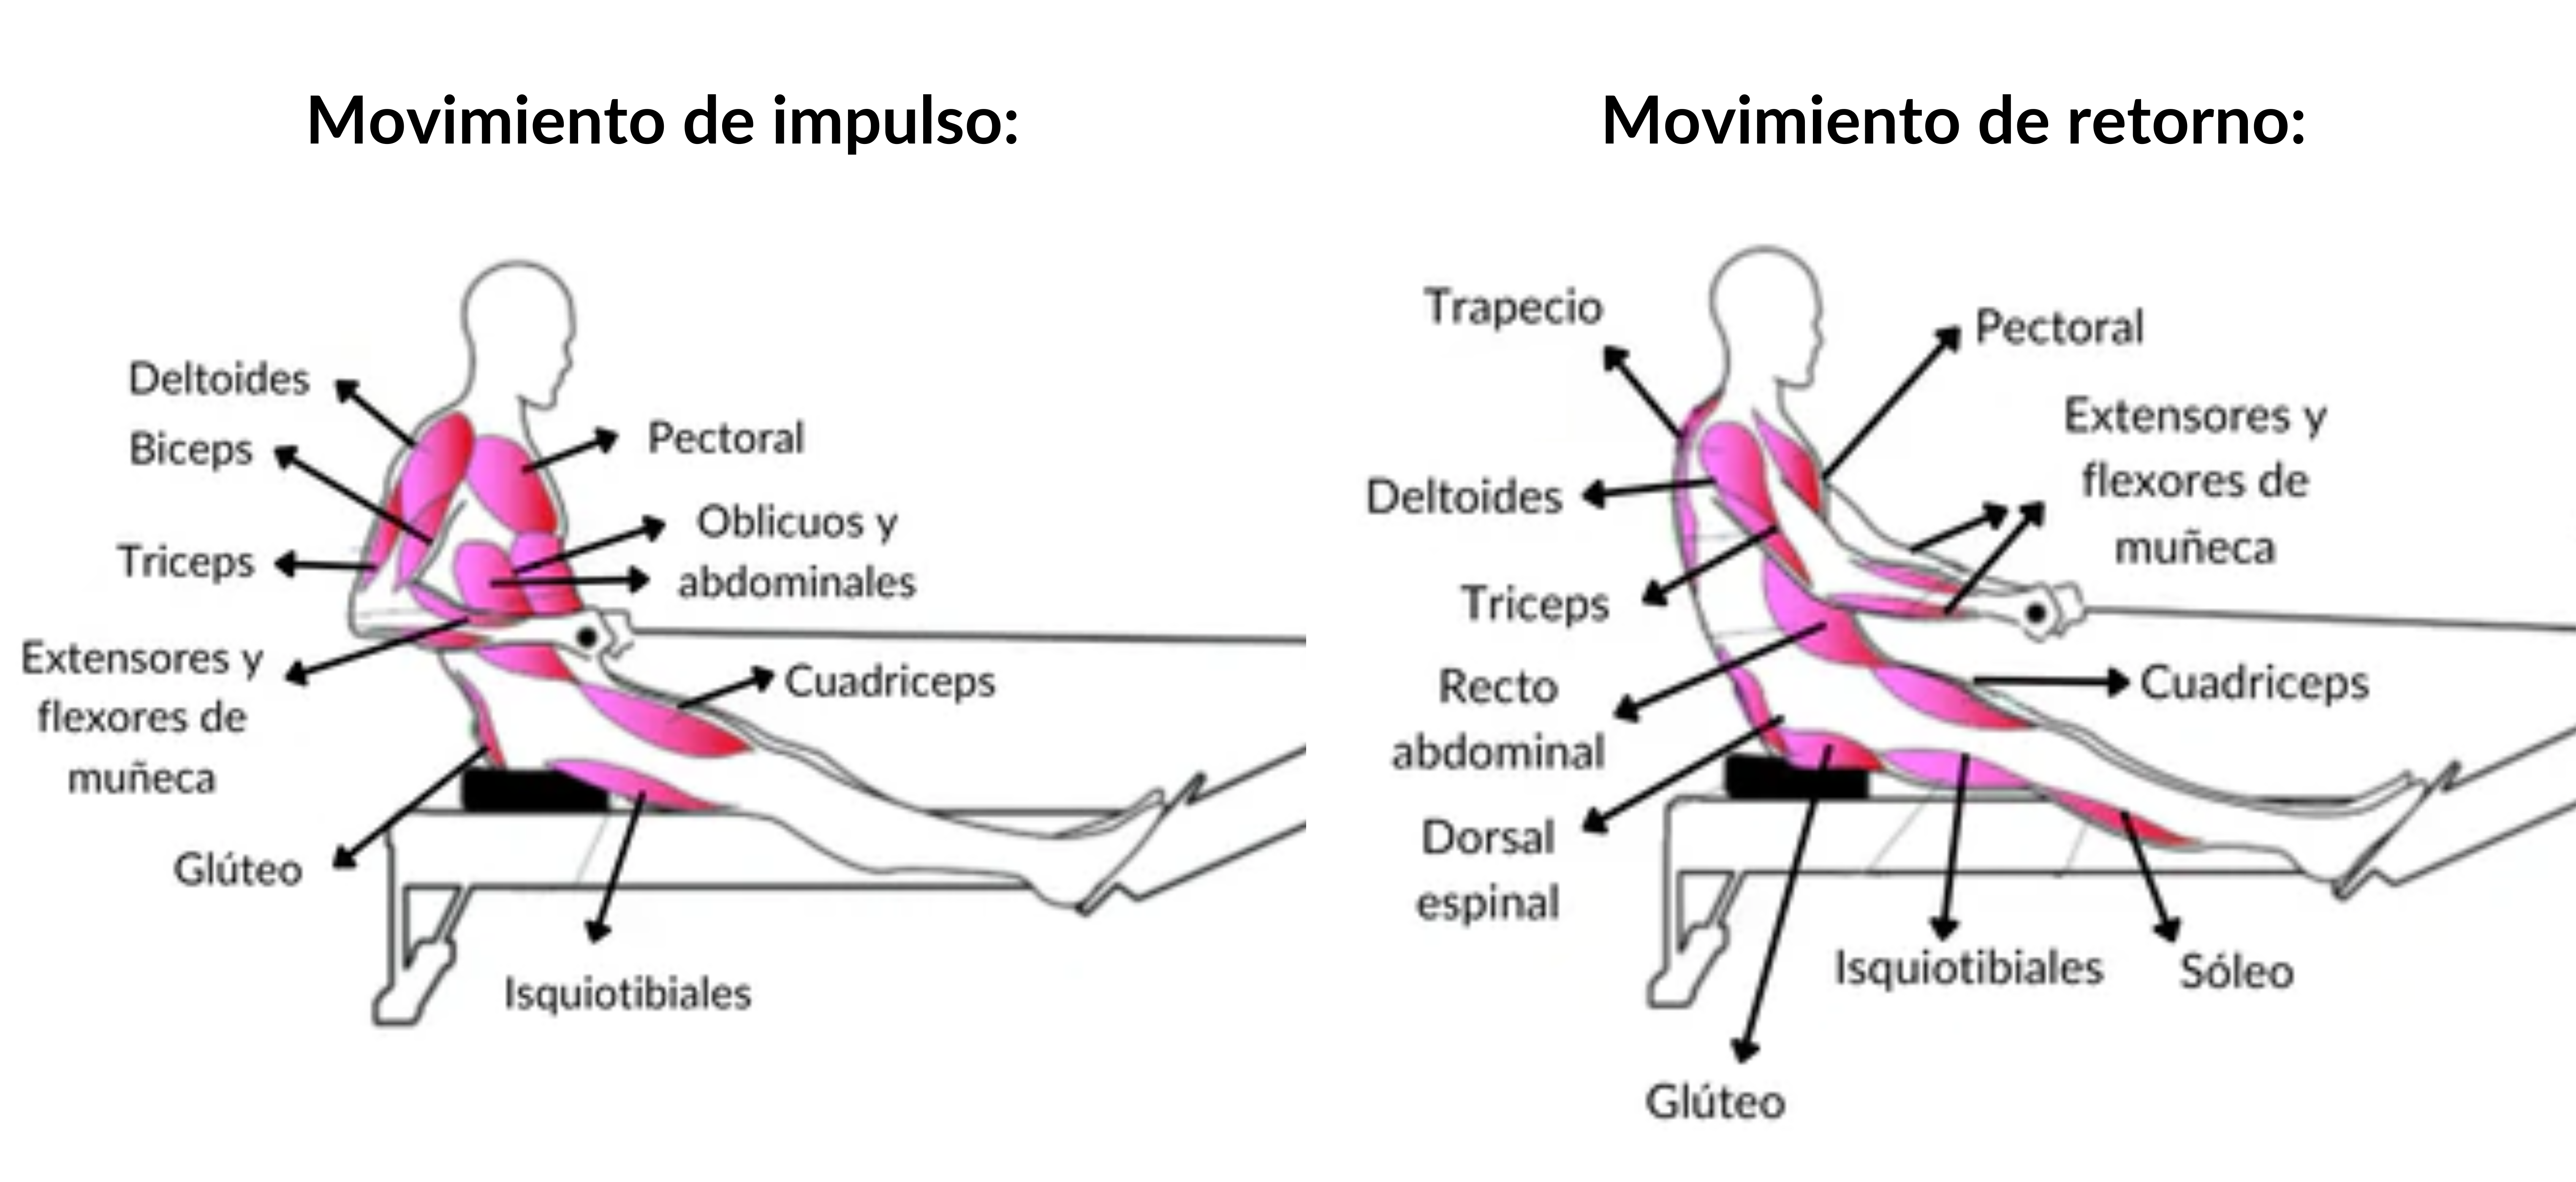 What muscles are worked during rowing exercise